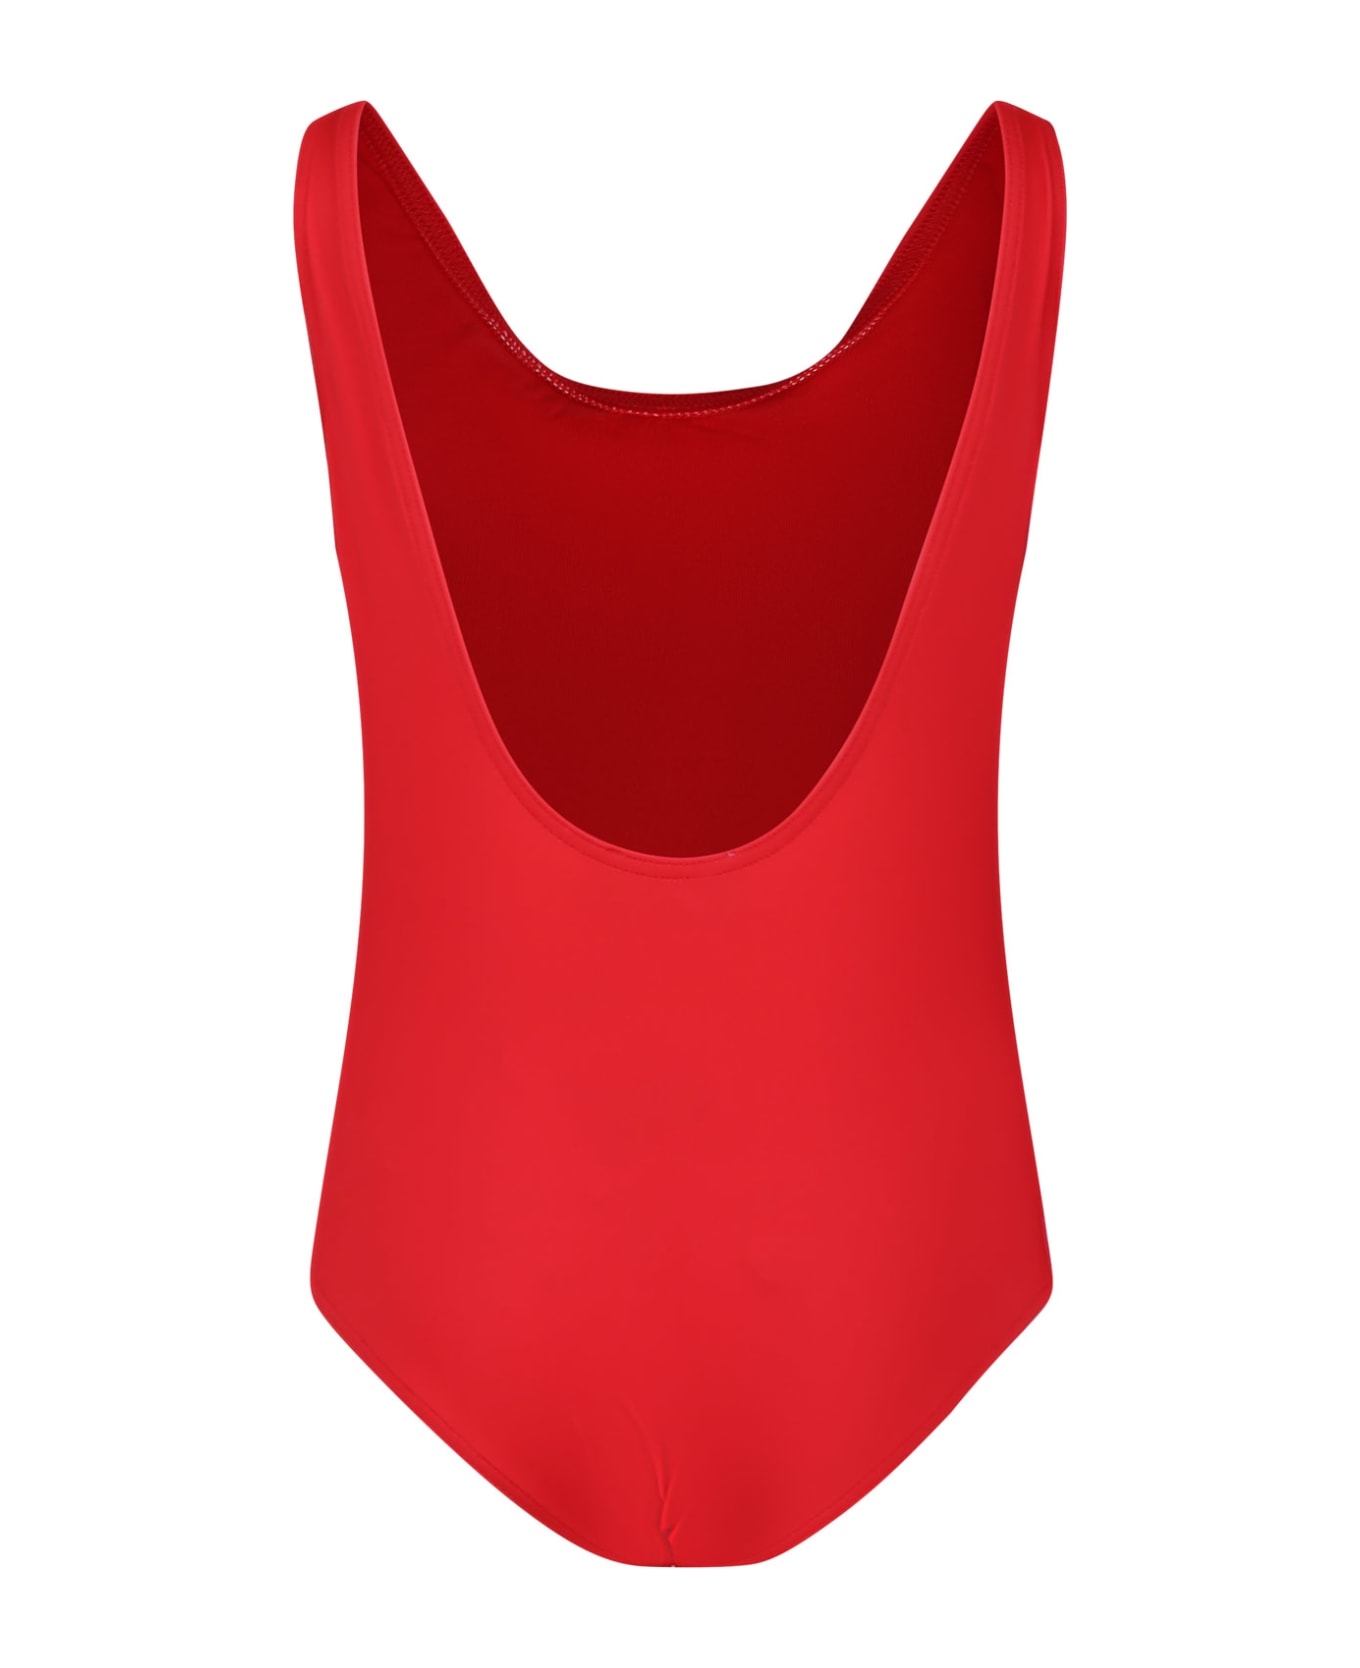 Moschino Red One-piece Swimsuit For Girl With Logo - RED 水着